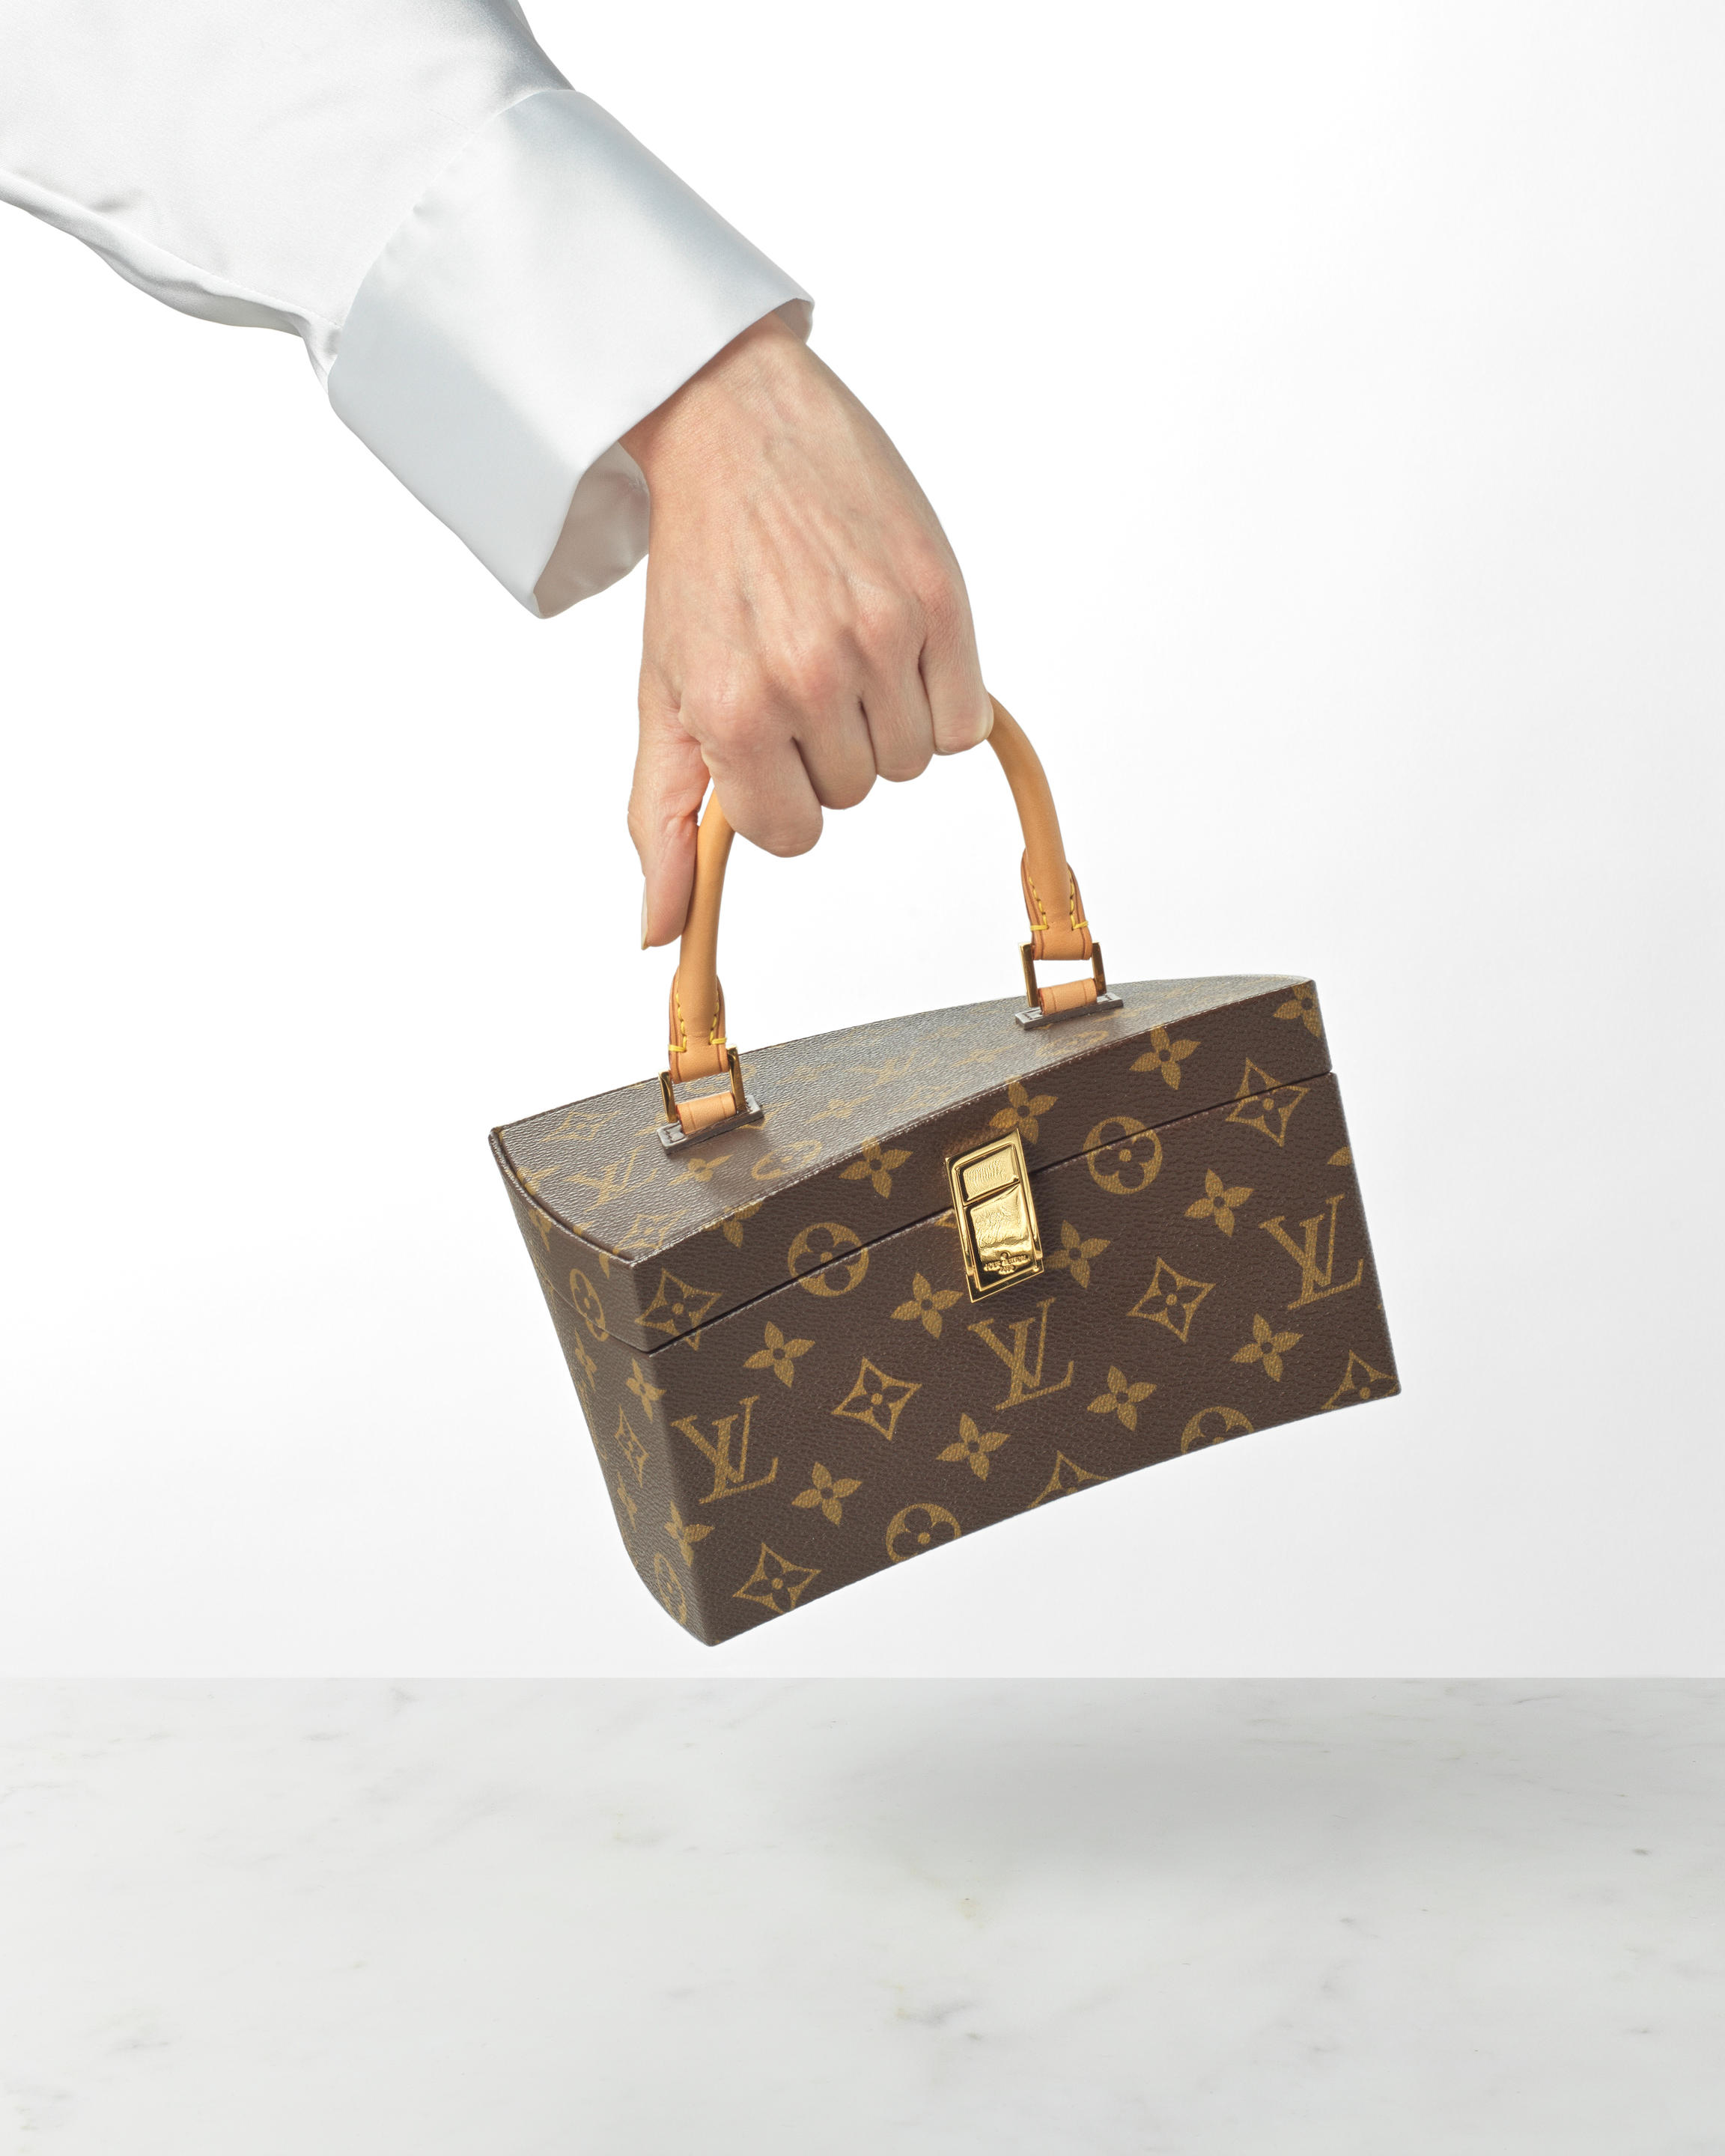 Louis Vuitton x Frank Gehry a Monogram Twisted Box Bag 2014 Iconoclasts  collection (includes shoulder strap, mirror, 'F.G' monogrammed dust bag  with luggage tag and booklets ) - Bonhams